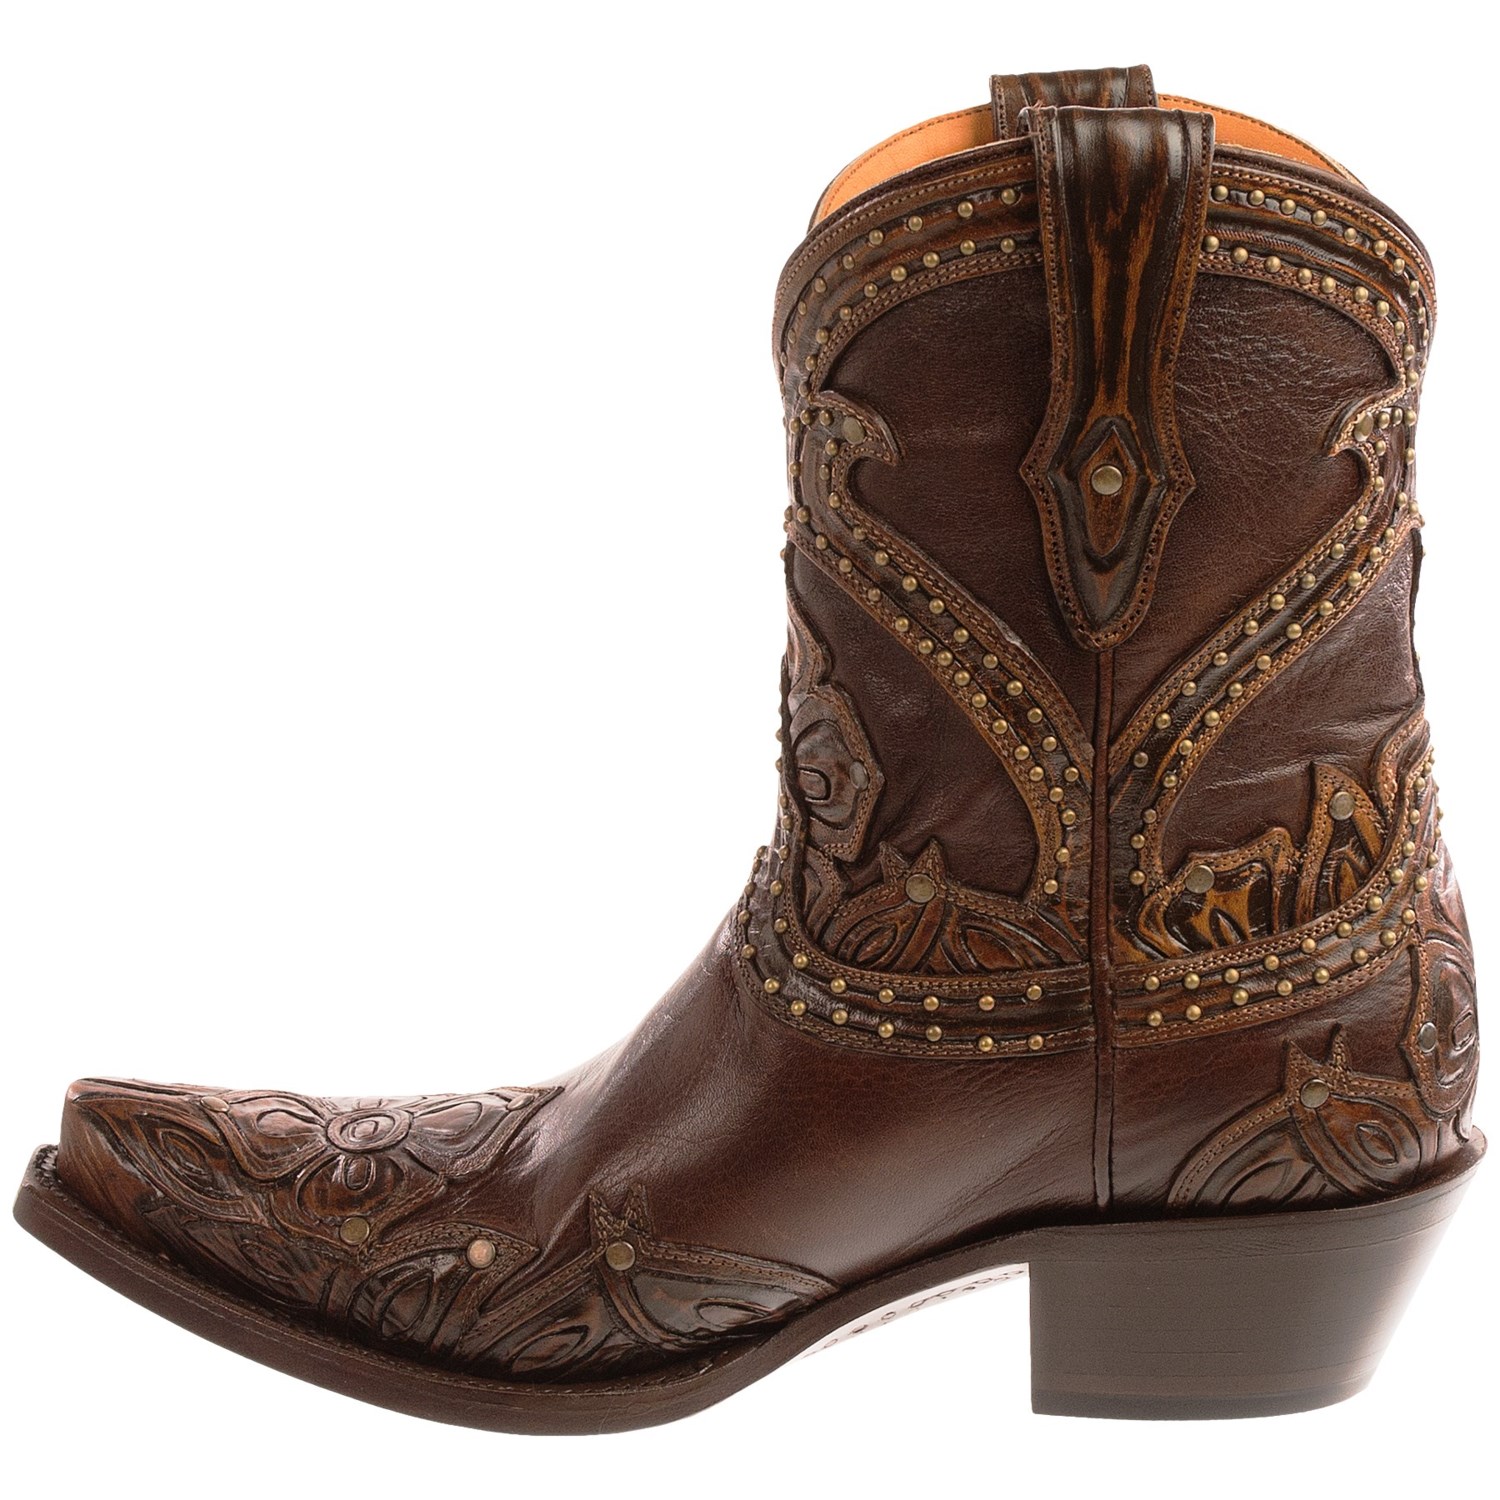 Lucchese Tooled Petal Cowboy Boots (For Women) 9300Y